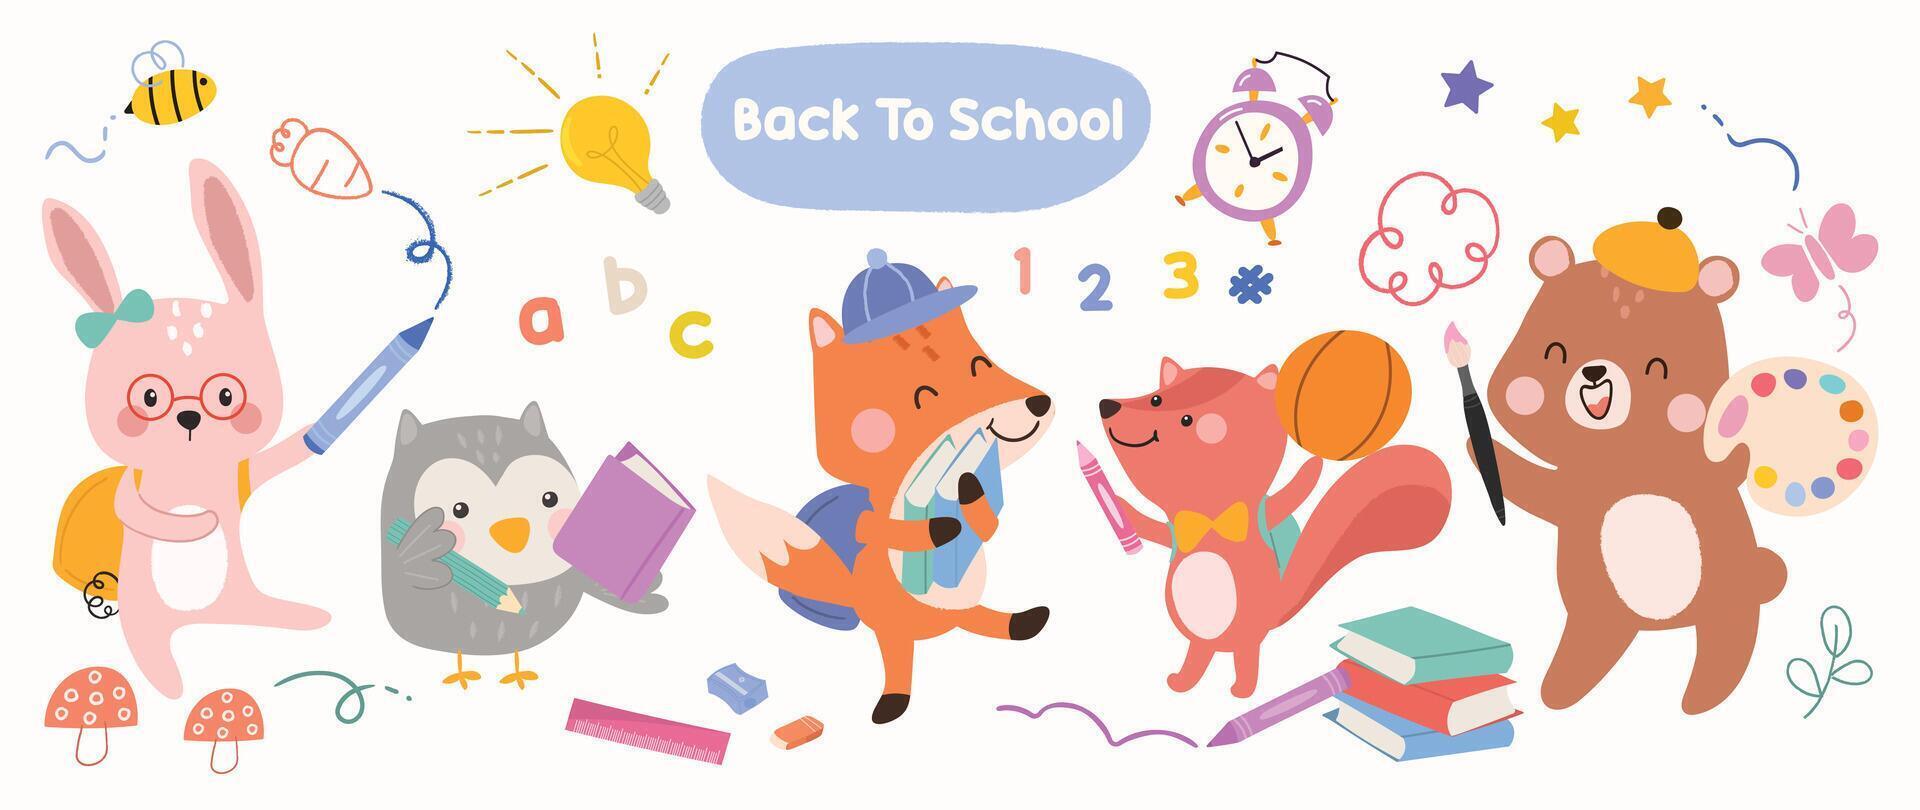 Back to School concept animal set. Collection of adorable wildlife, rabbit, squirrel, bear, fox, bird. School with funny animal character illustration for greeting card, kids, education. vector